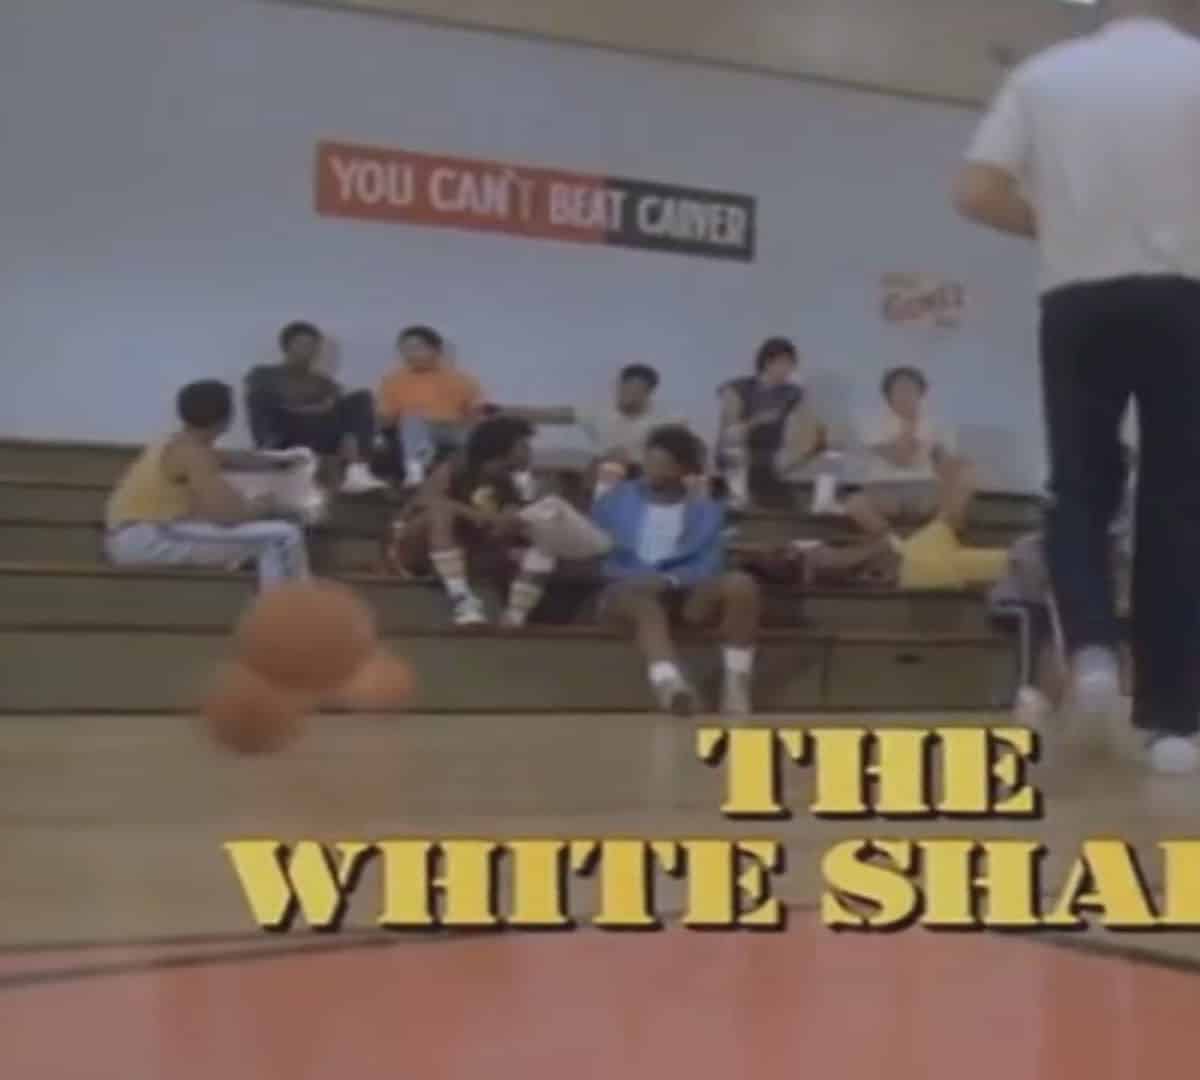 title screen for the television show white shadow